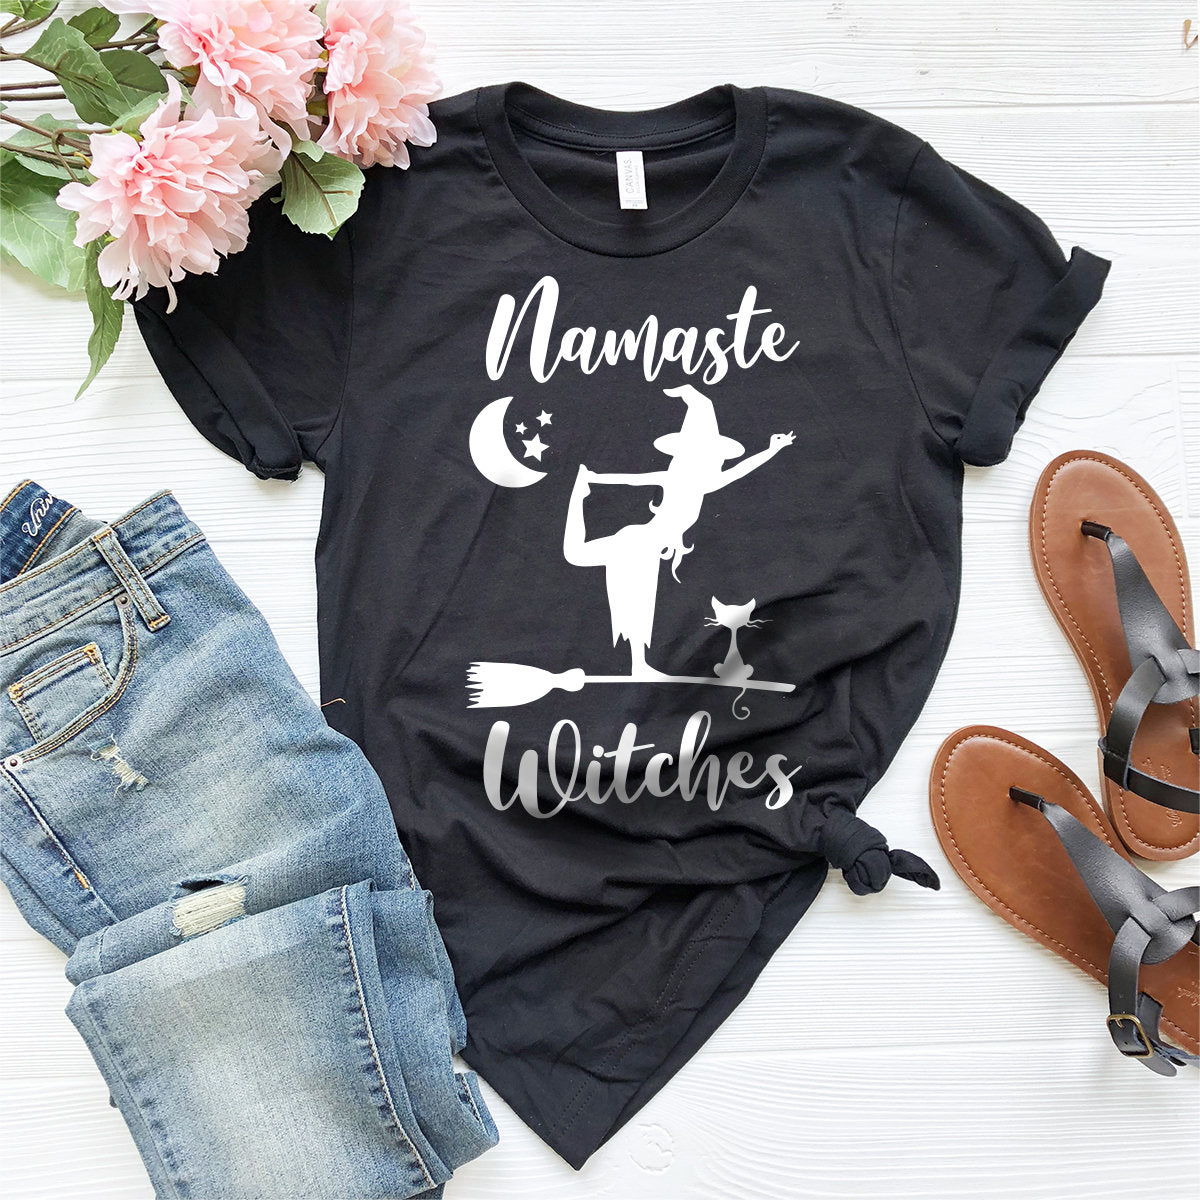 Namaste Witches T-Shirt, Halloween Shirt, Fall Tshirt, Halloween Yoga Tee, Funny Halloween Gift, Meditation Shirt, Funny Witch Shirt - Fastdeliverytees.com